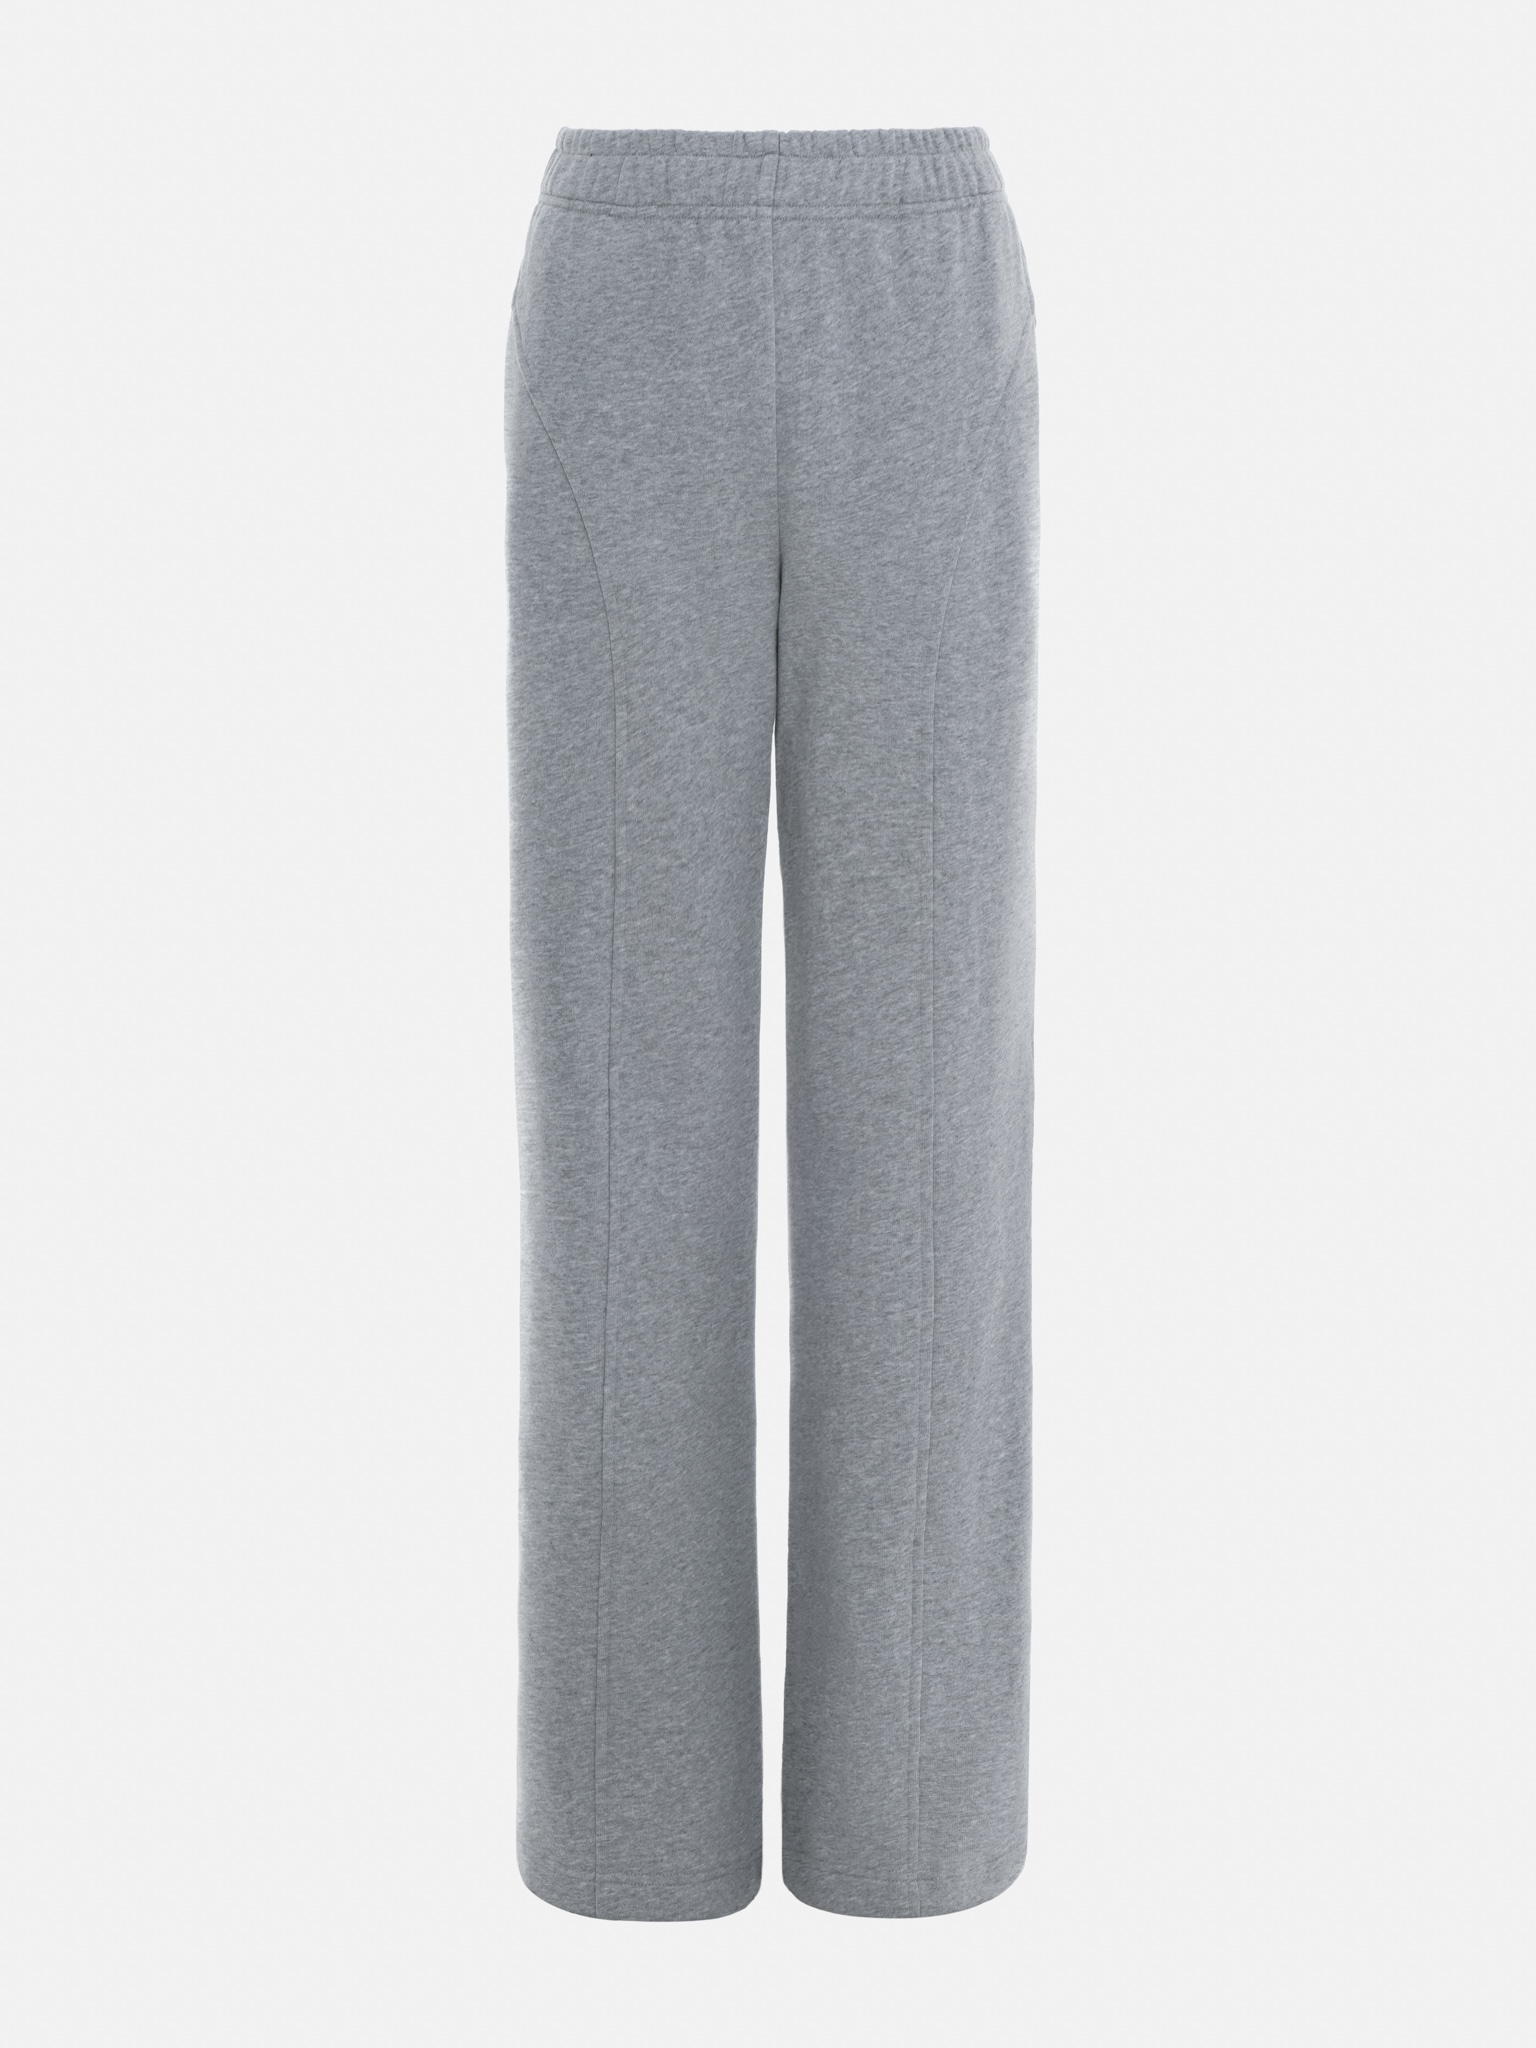 French terry trousers with raised darts :: LICHI - Online fashion store